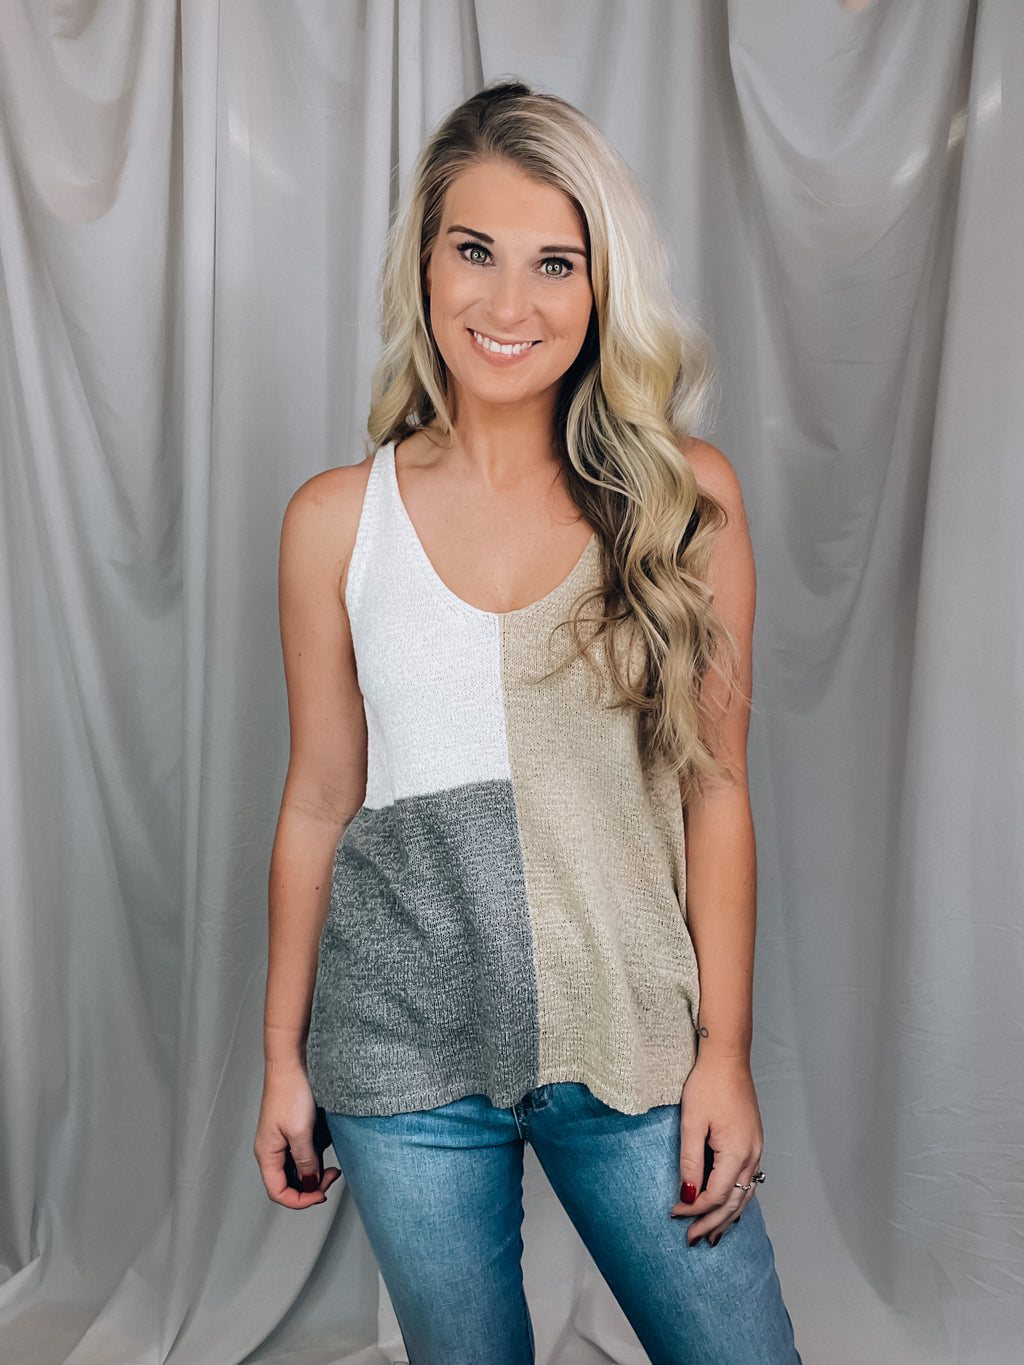 Features a knitted, soft material, sleeveless detail and a color block base. Perfect tank to have all summer long. Fits true to size!